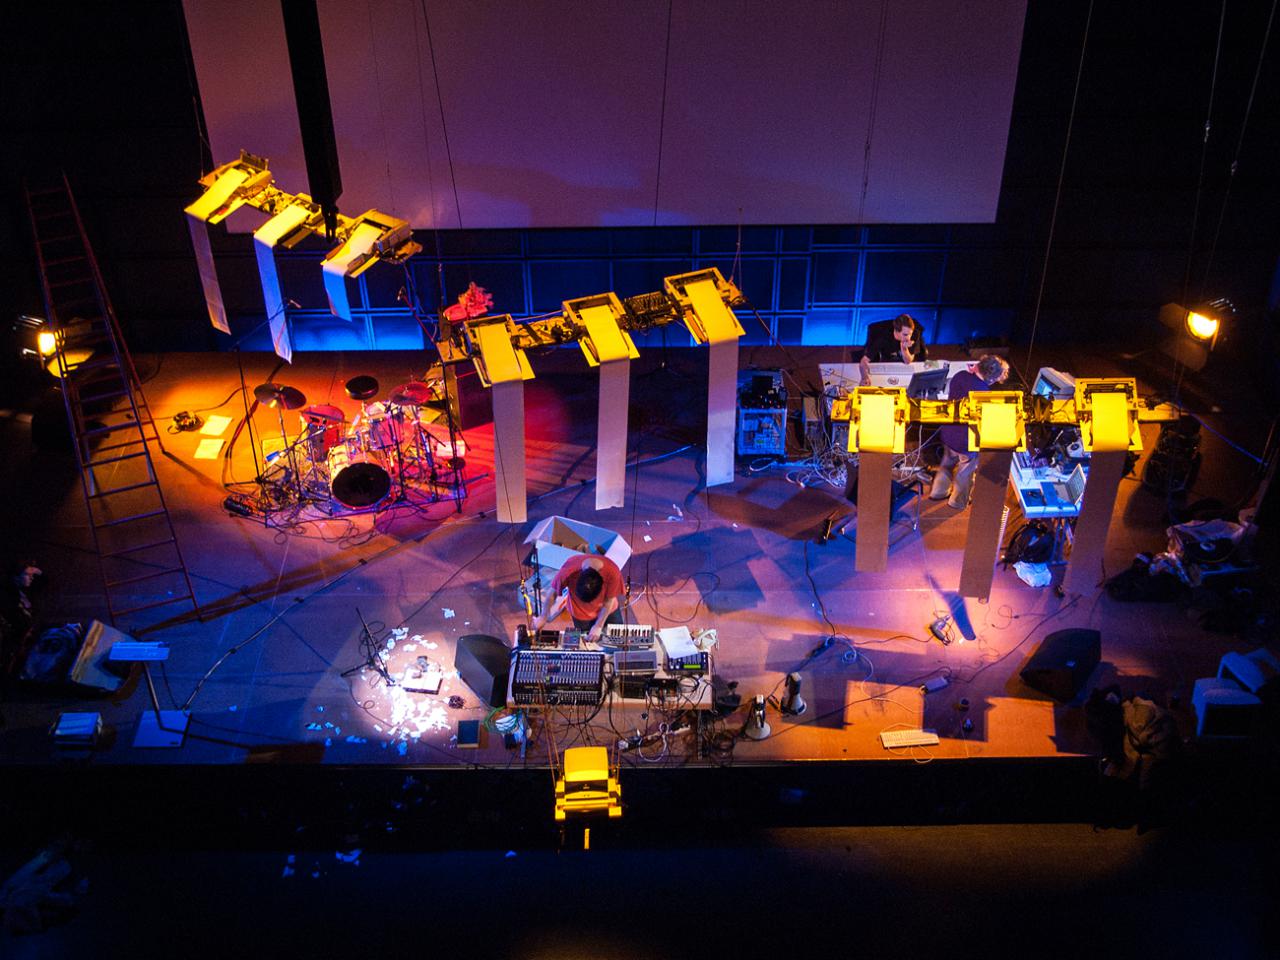 Concert at the ZKM_Media Theater